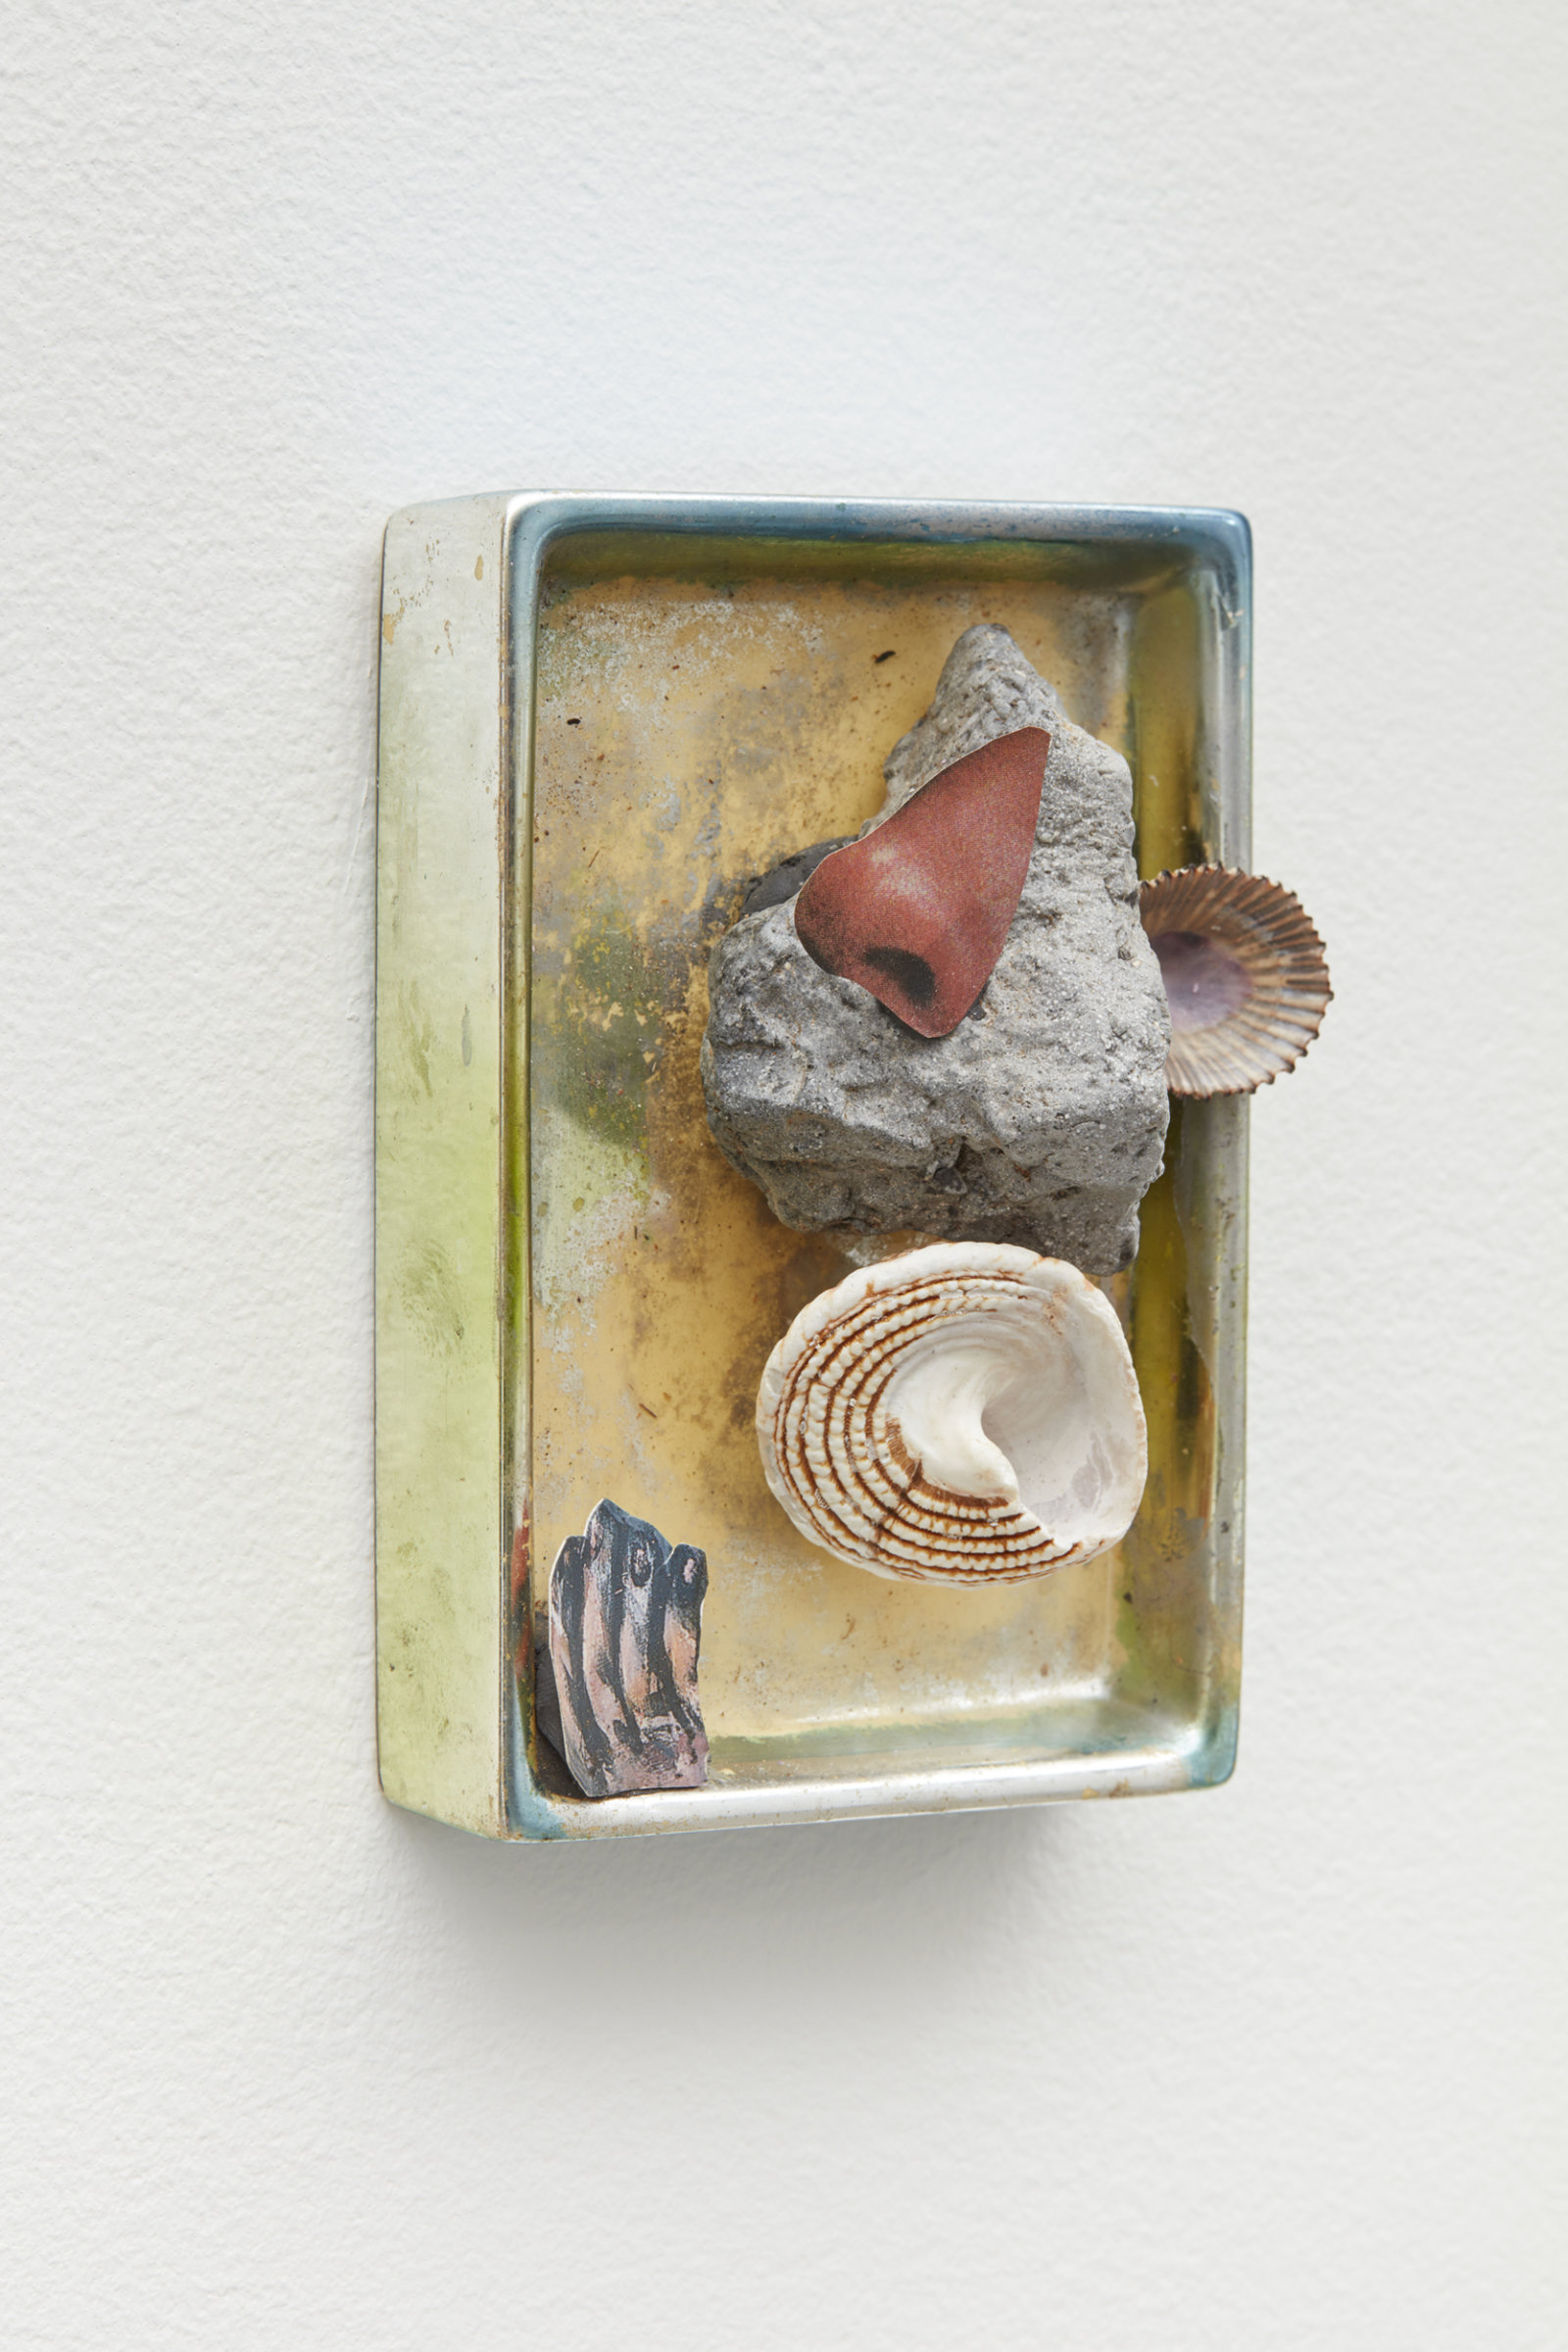 Geoffrey Farmer, Next lucky reminder of an inner world, holography, sea floor mapping, mirror, 2020, cut-and-pasted printed paper, soap dish, plastiglomerate shell, epoxy, clay, 6 x 4 x 3 in. (15 x 10 x 6 cm)